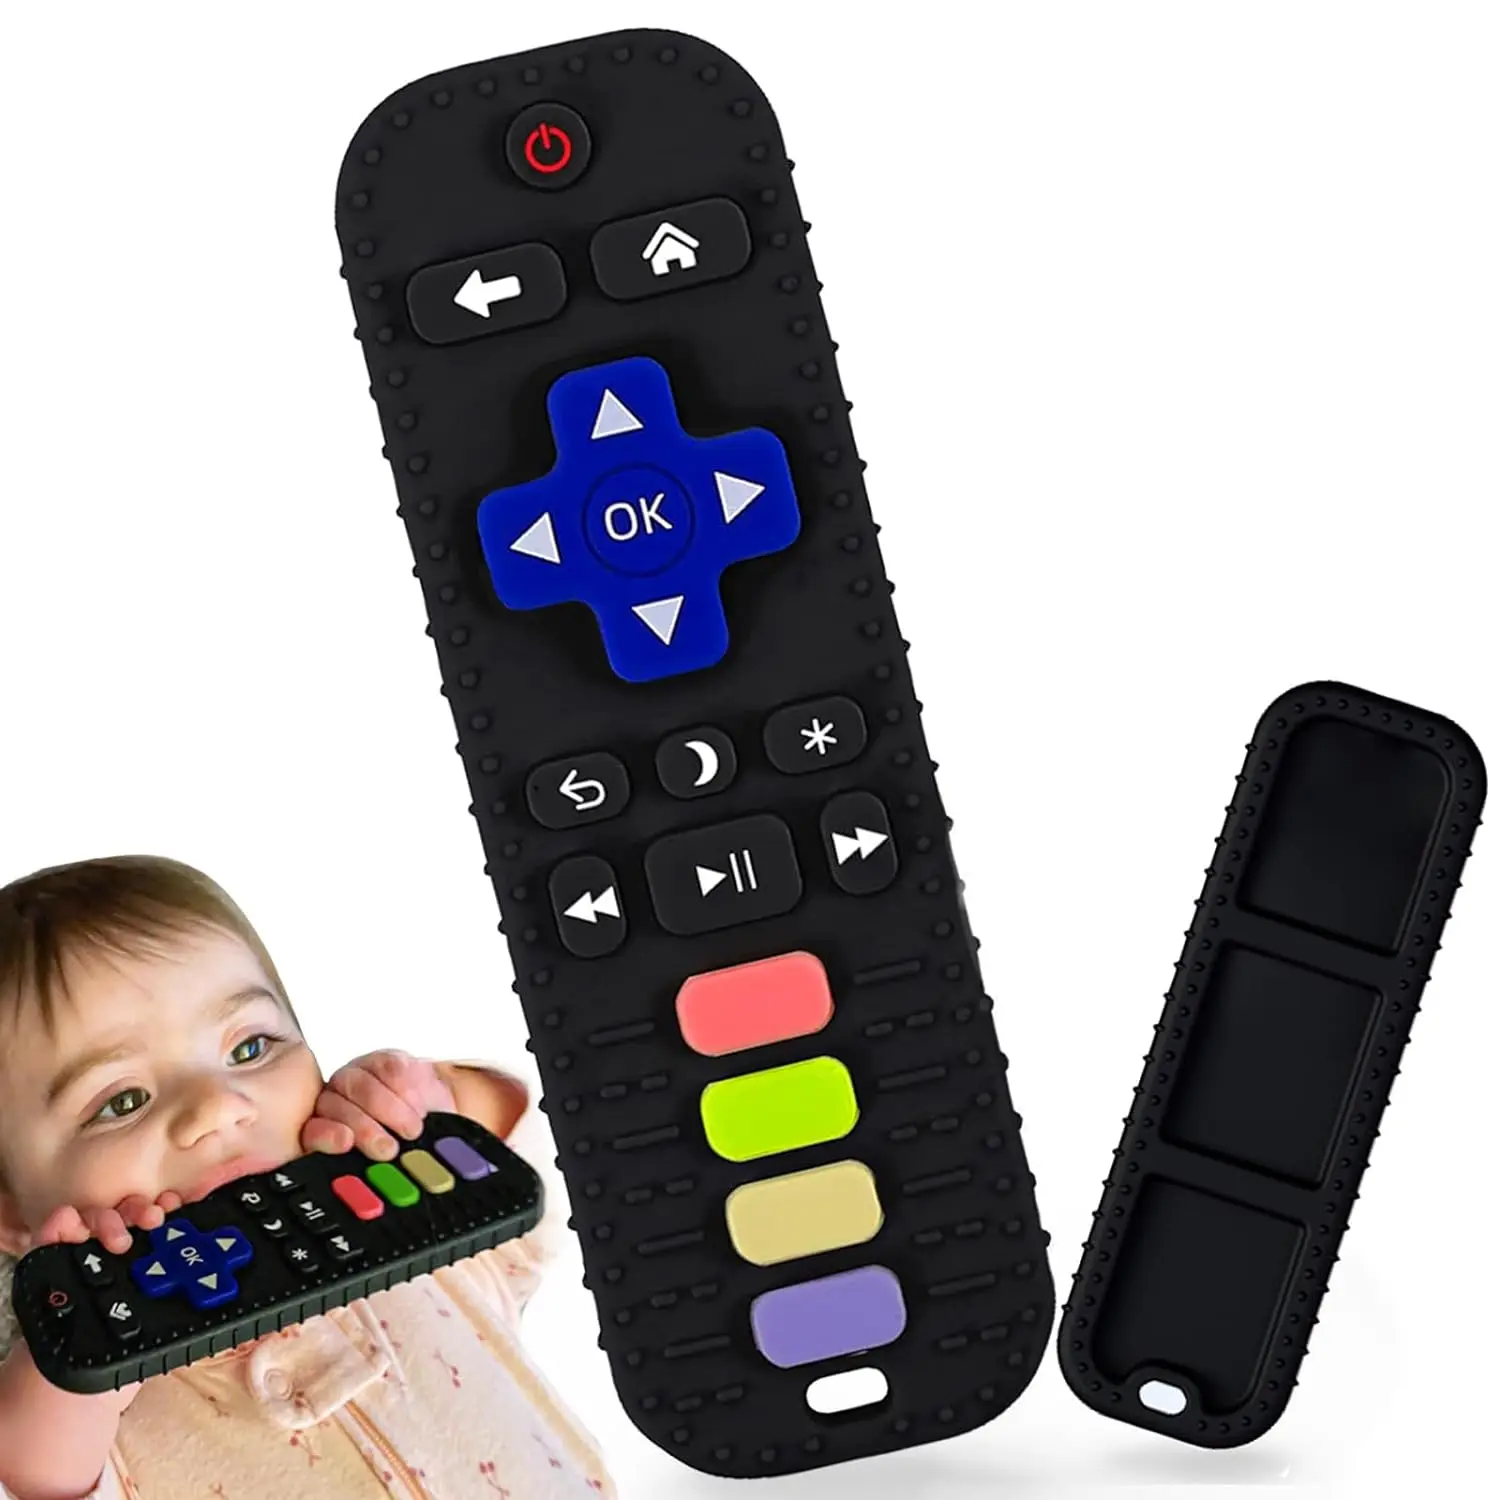 

Baby Teether Toy Chew Toy for Babies 3-24 Months TV Remote Control Shape Teething Relief Baby Toys for Infants Sensory Education